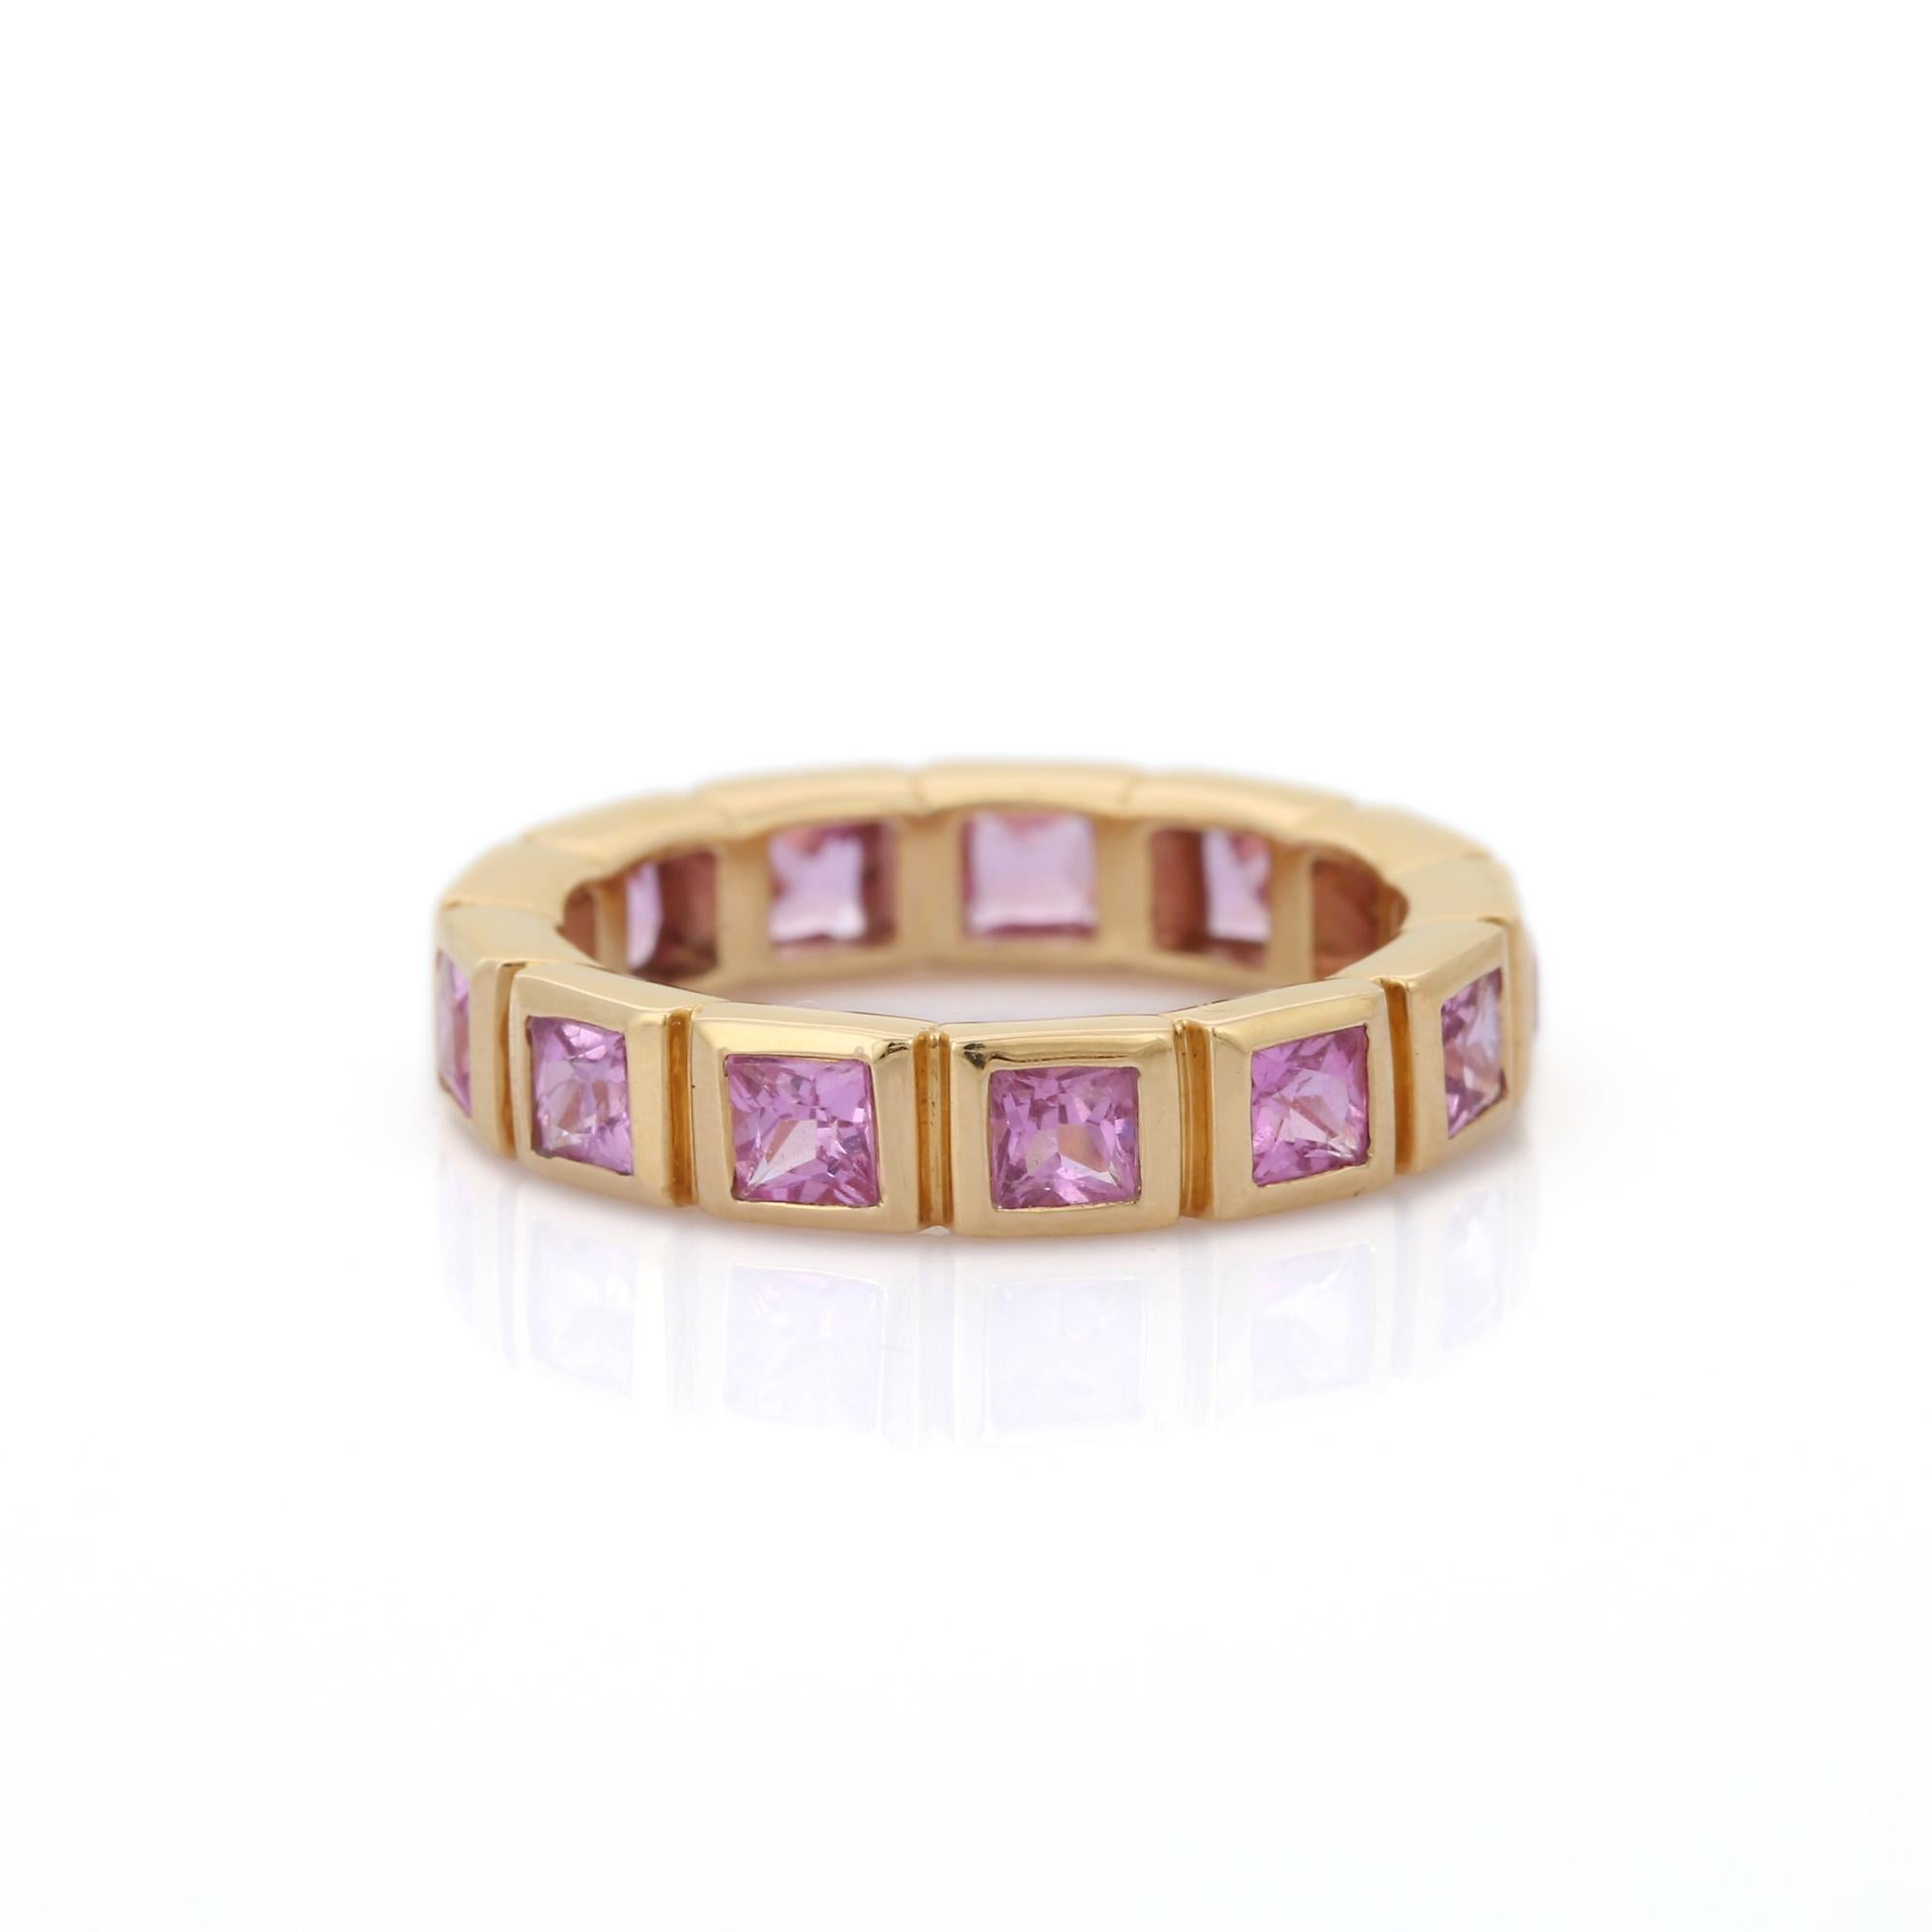 For Sale:  2.48 Carat Pink Sapphire Square Cut Eternity Band Ring in 18K Yellow Gold 6